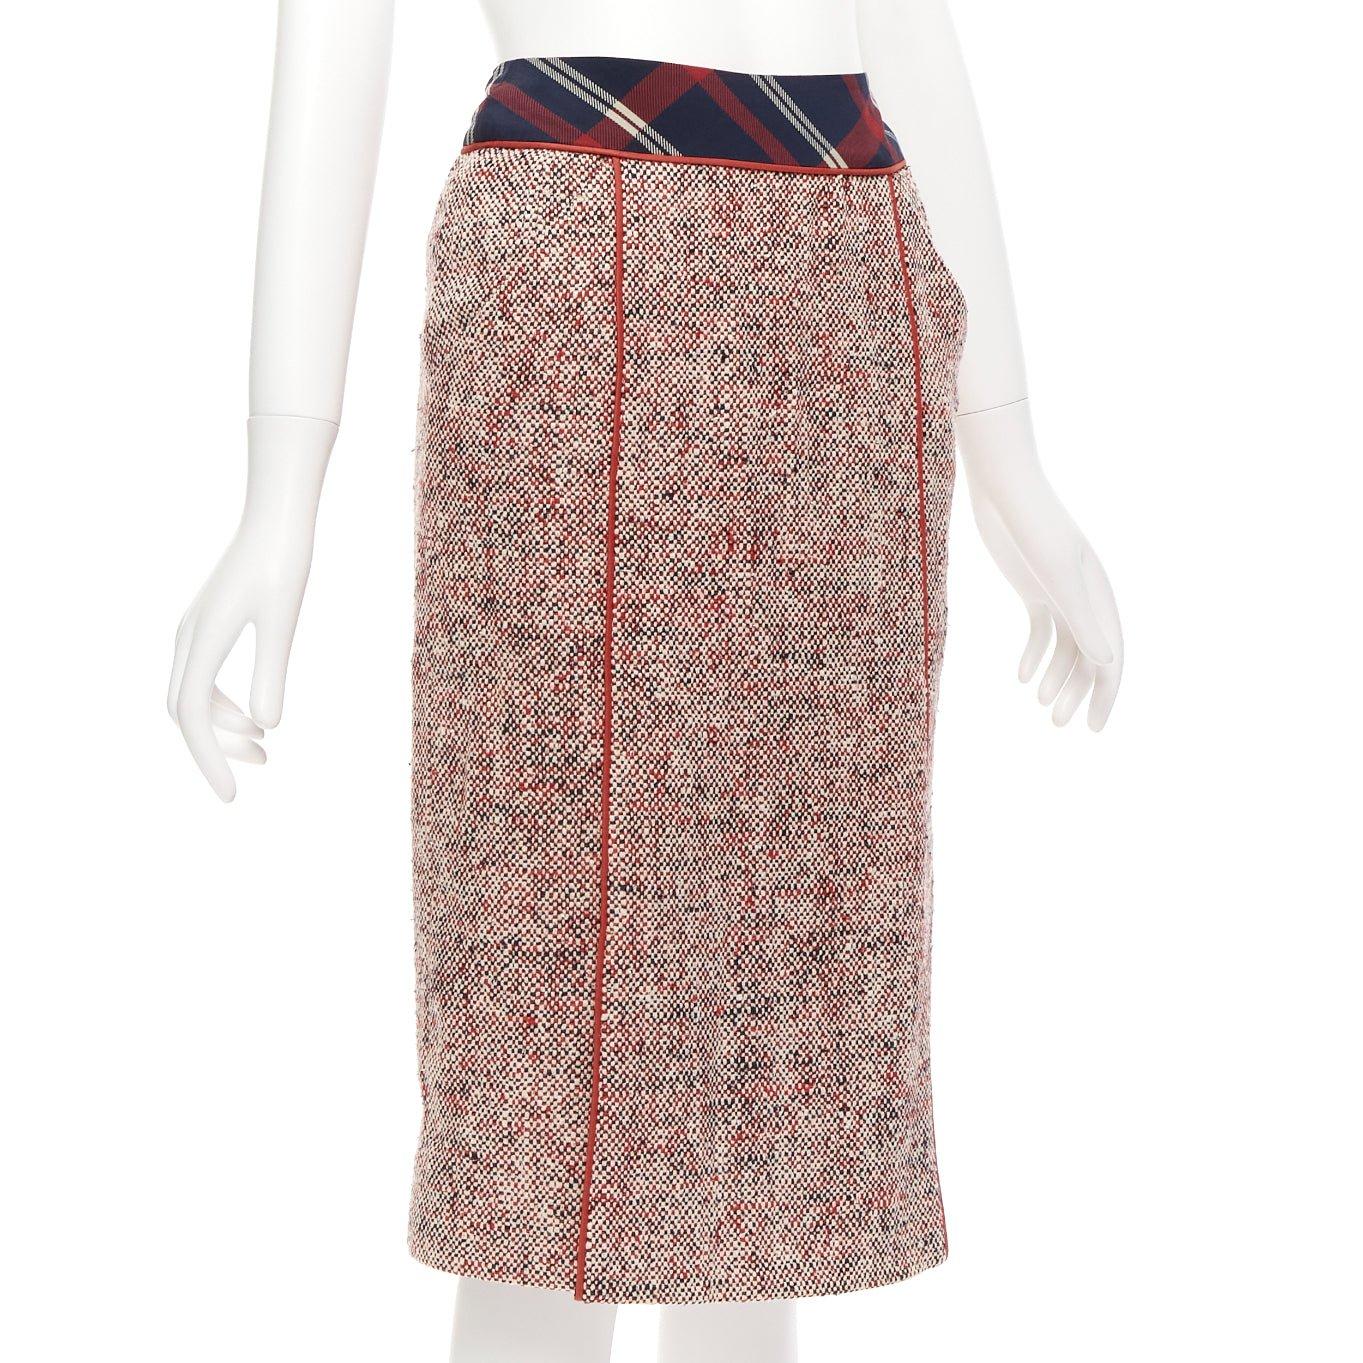 CHANEL Vintage red speckled boucle navy tartan pencil skirt FR34 XS
Reference: CNLE/A00260
Brand: Chanel
Designer: Karl Lagerfeld
Material: Feels like wool
Color: Red, Multicolour
Pattern: Tweed
Closure: Zip
Lining: Red Fabric
Extra Details: Back